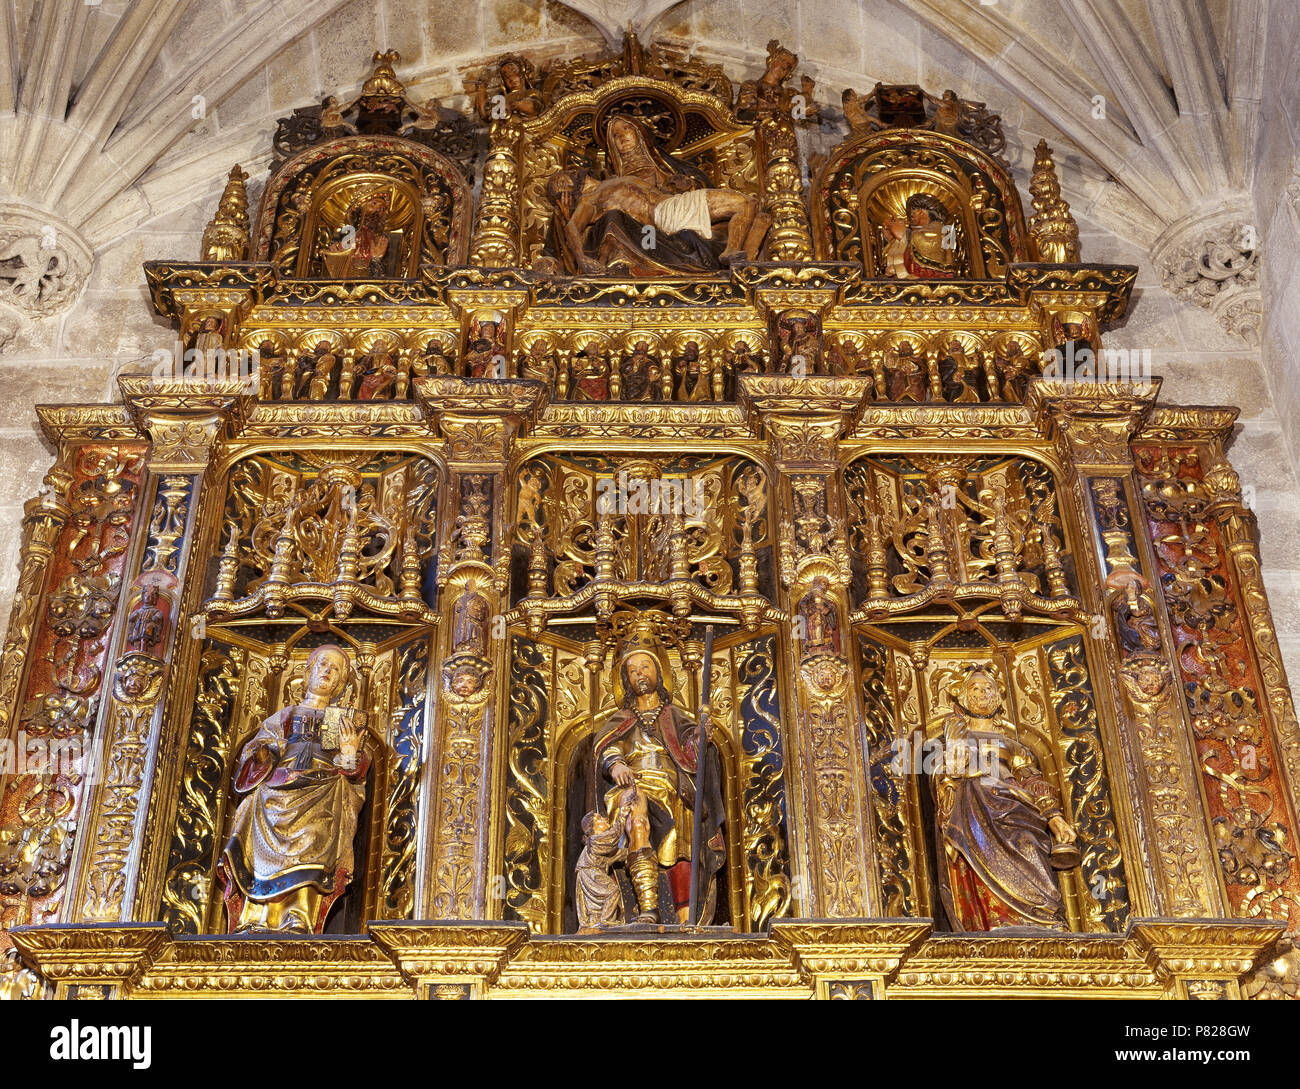 Spain, Galicia, province of La Coruña, Betanzos. Santiago Church. Gothic church built in 15th century by Fernan Perez de Andrade. Altarpiece of the Chapel of St. Peter and St. Paul. Work of the sculptor Cornielles of Holland (16th century). Detail of the upper part. Renaissance style. Stock Photo